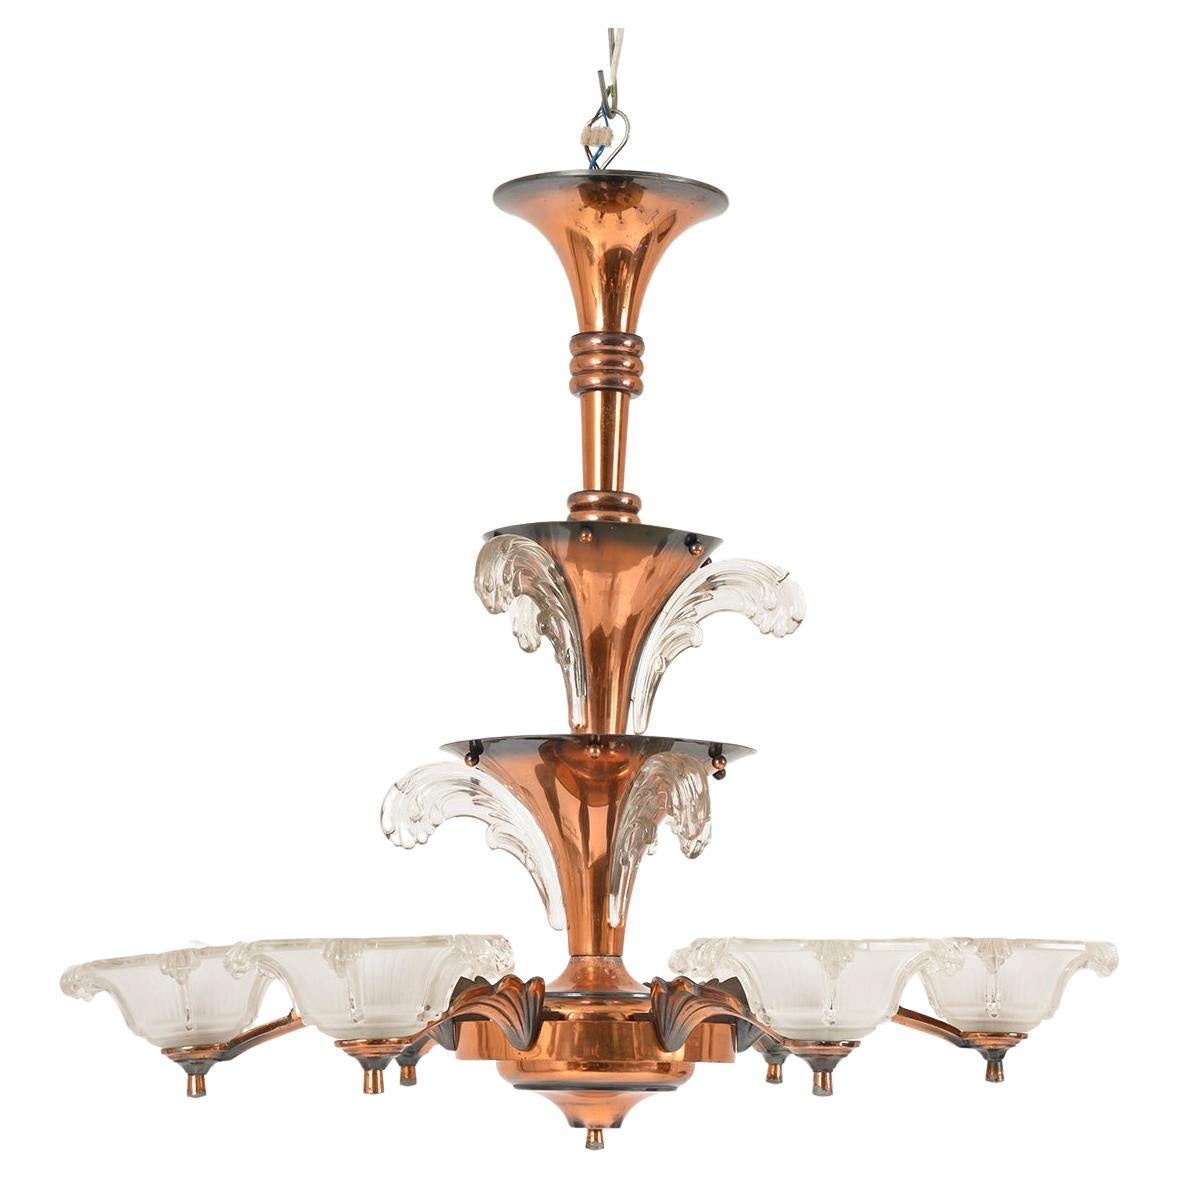 1930s French Art Deco 6-Arm Chandelier by Petitot and Ezan Copper and Glass